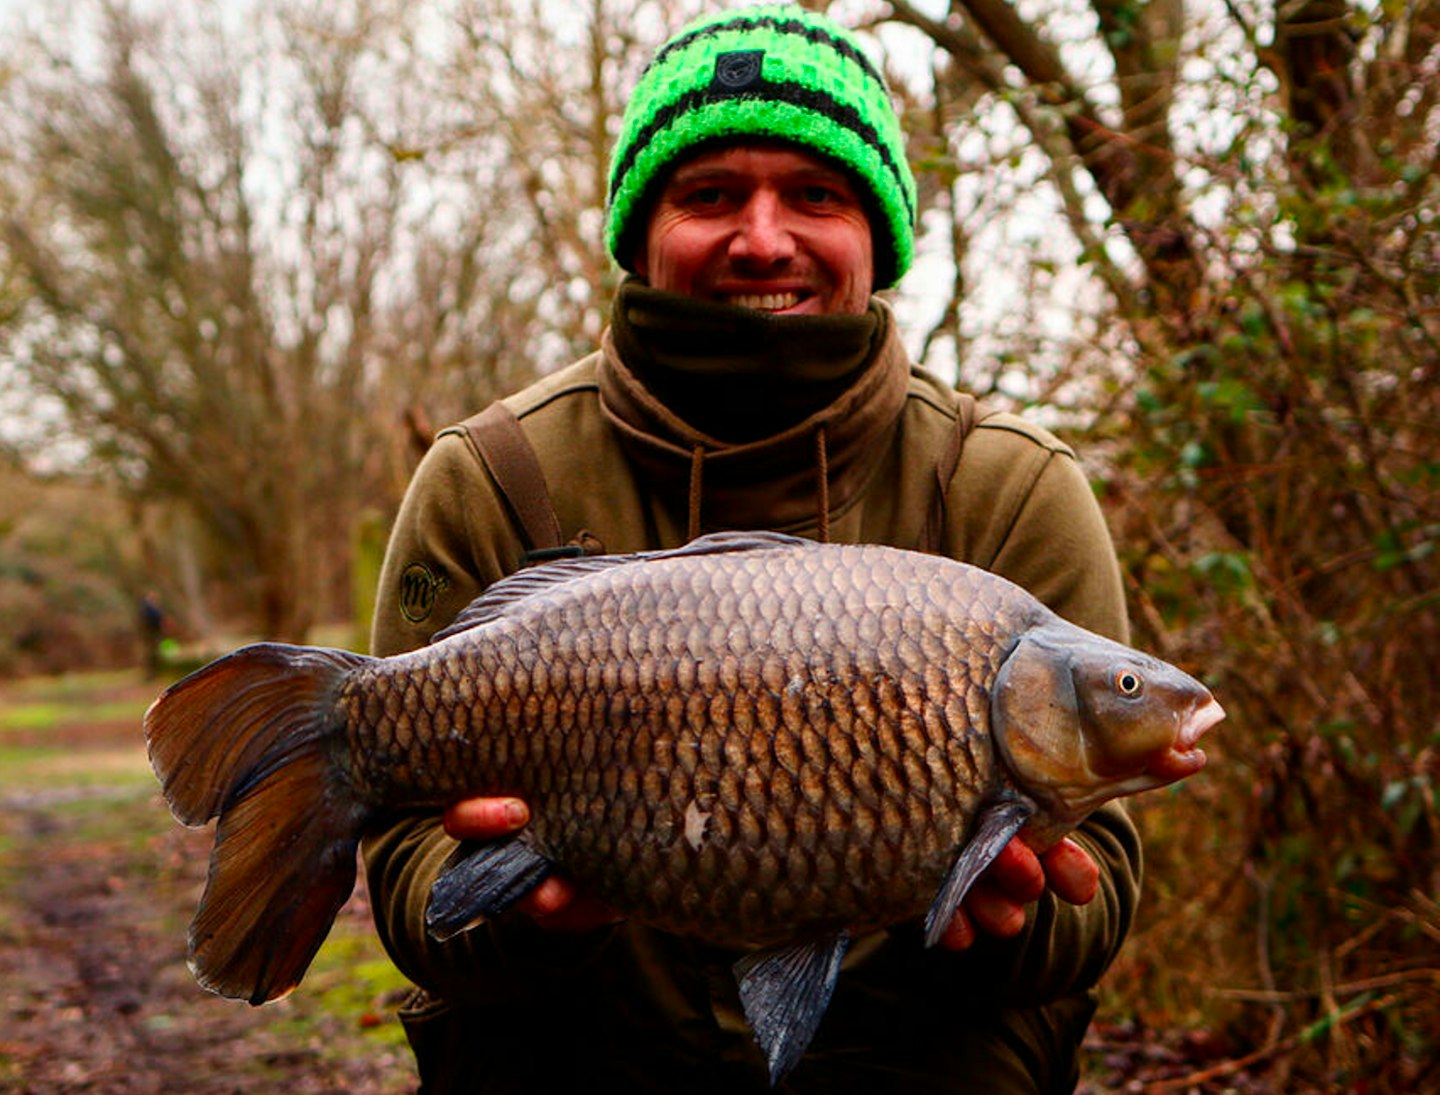 Chris Belcher’s 13lb 10oz specimen is likely to be the biggest F1 ever reported